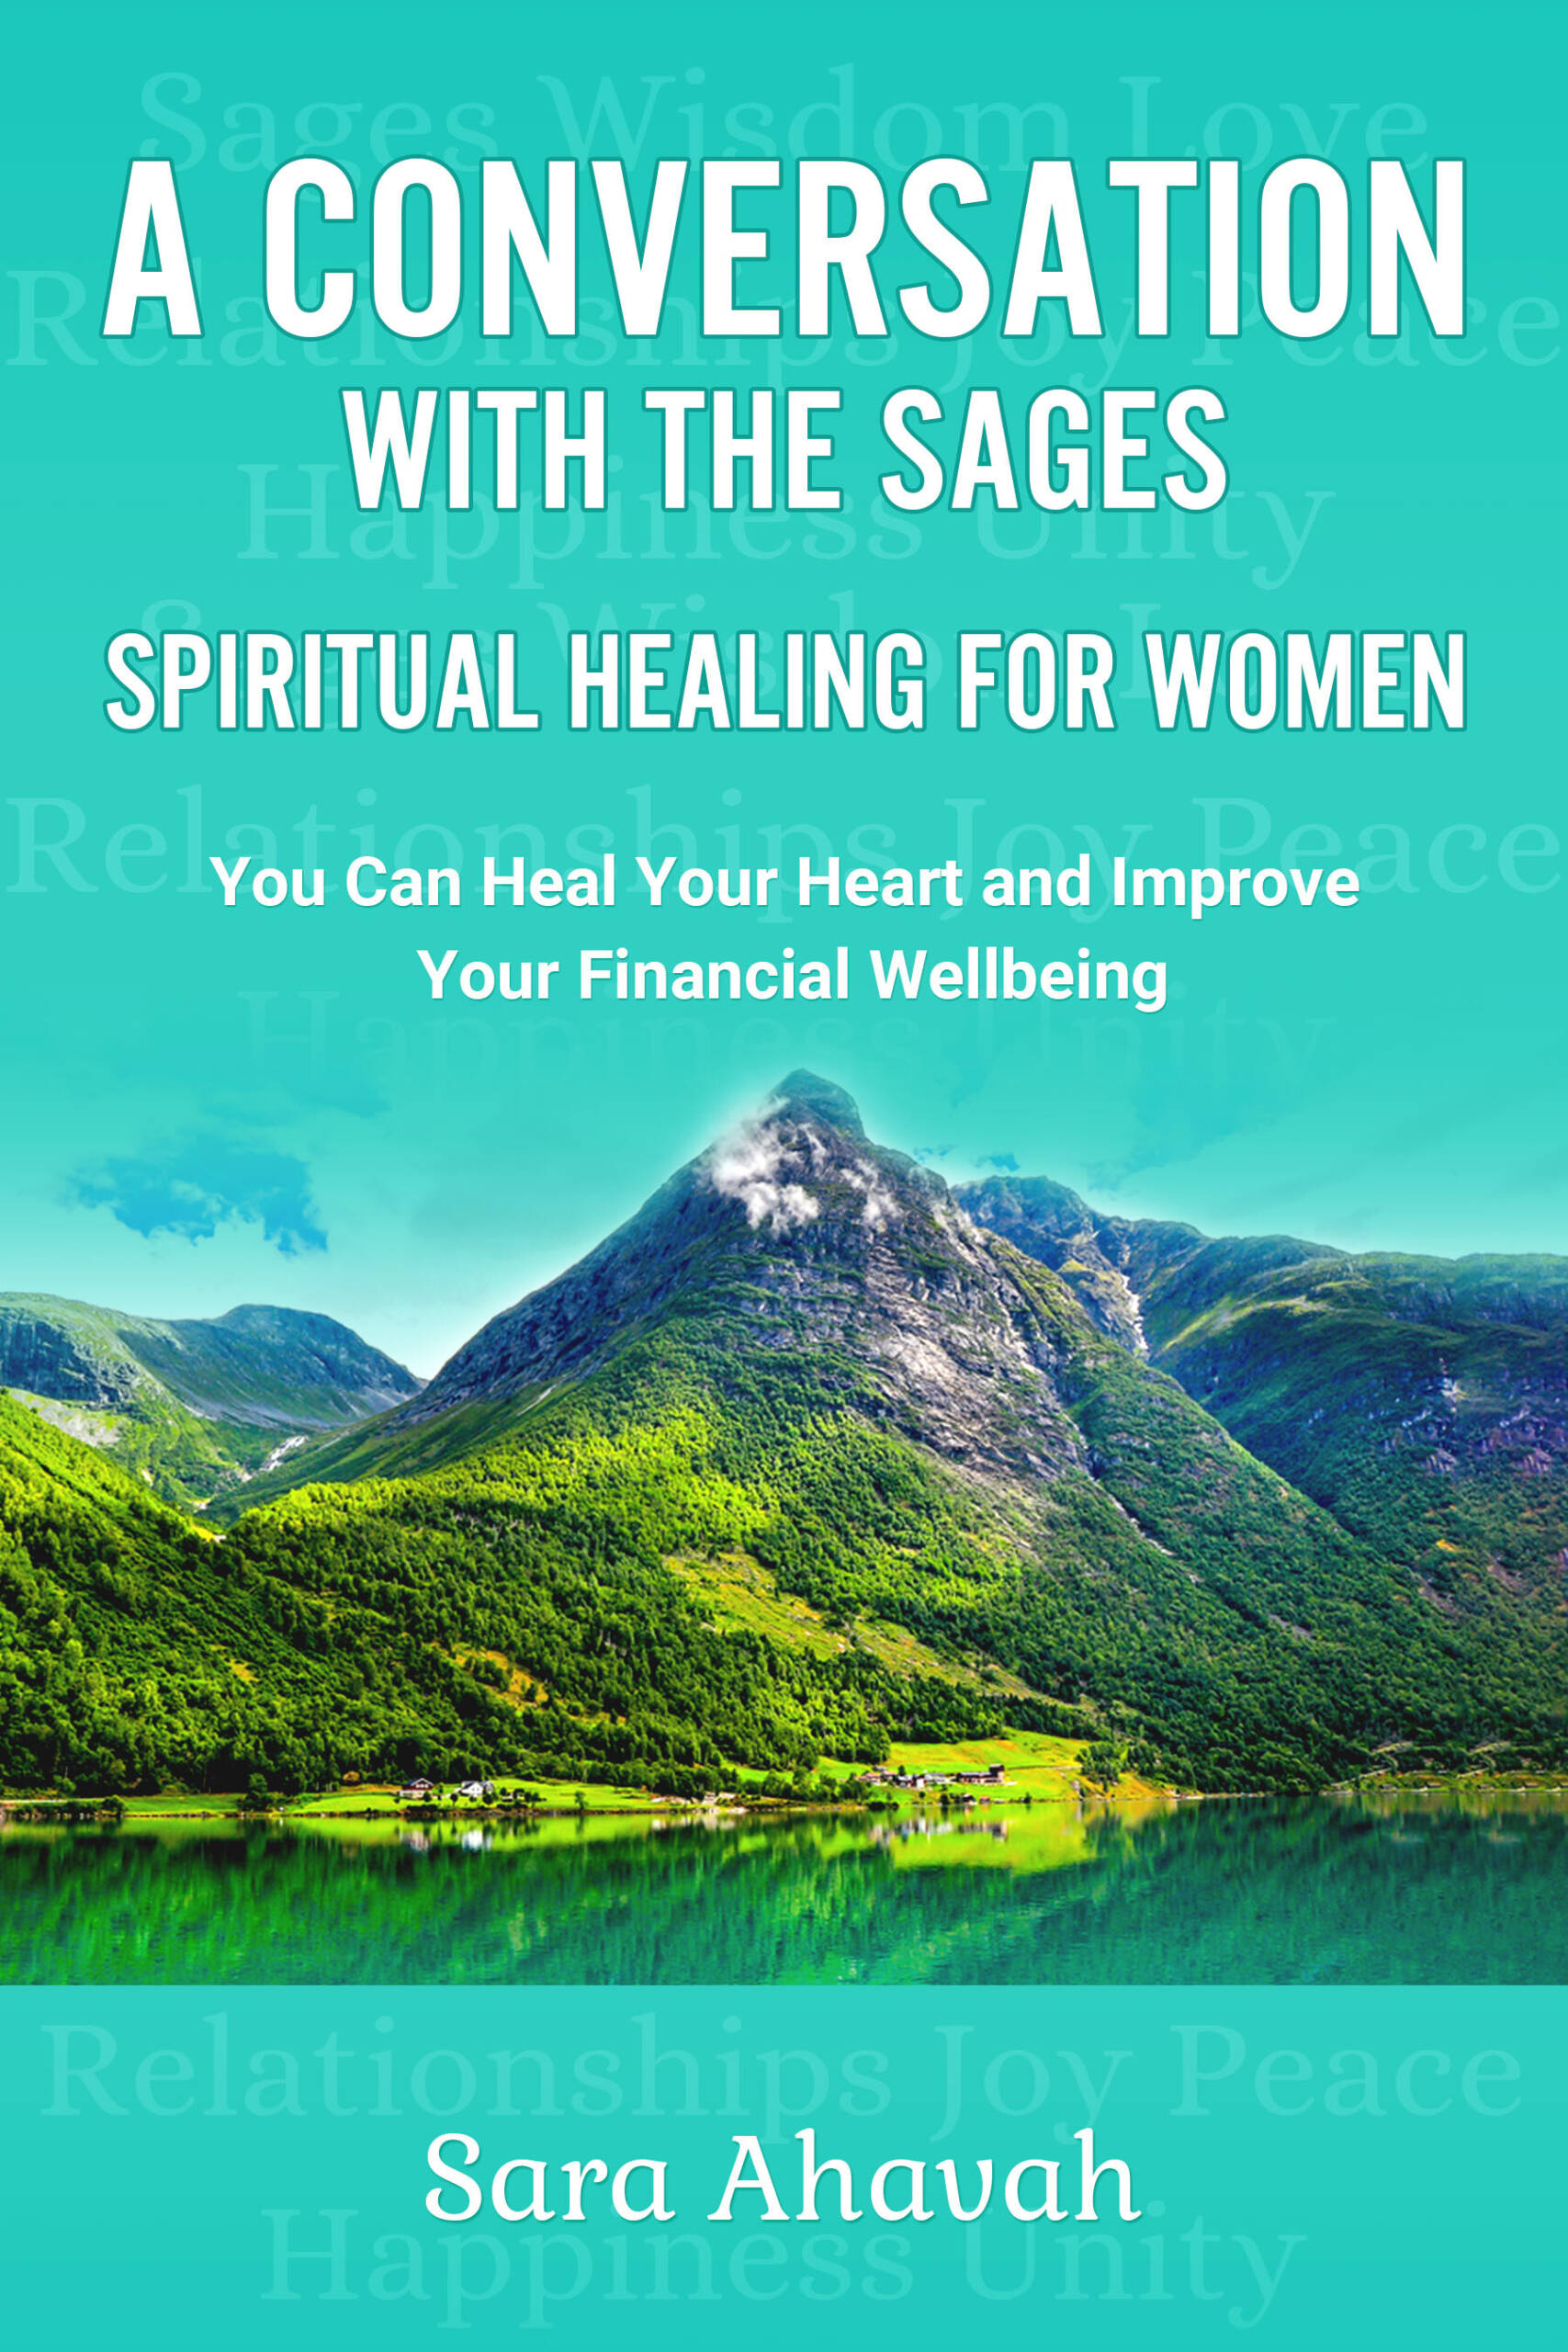 Sarainnerhealing EBook-Cover-scaled A Conversation With The Sages - Spiritual Healing For Women- Spiritual Healing For Women: You can heal your heart and improve your financial wellbeing  